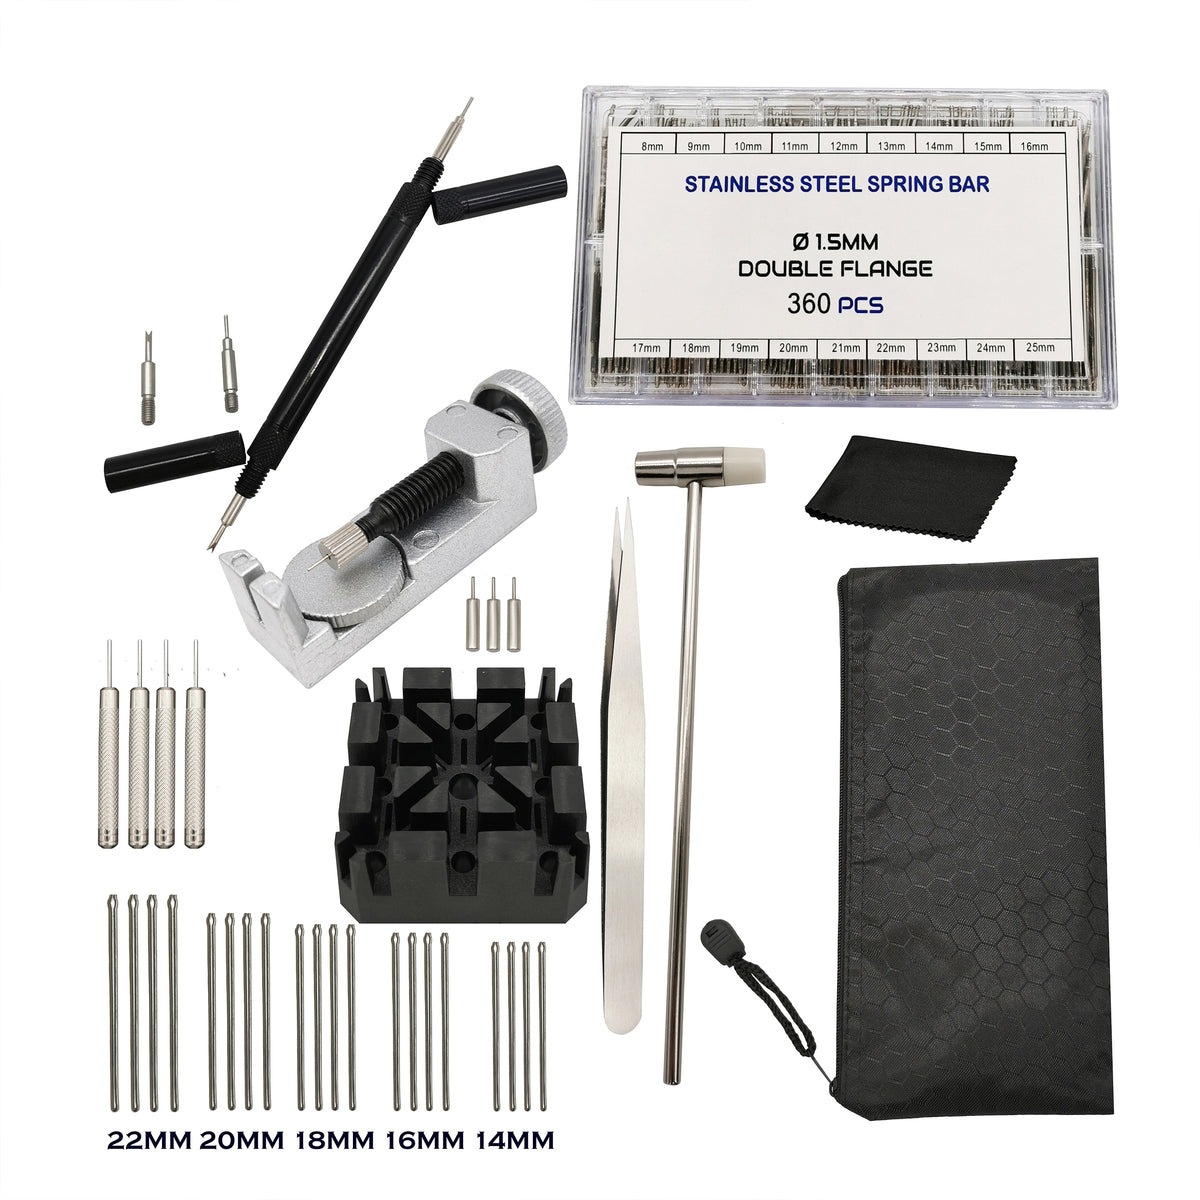 <transcy>Kit 14 pcs Pro Craftsman in leather for replacement of watch batteries and repair of straps</transcy>